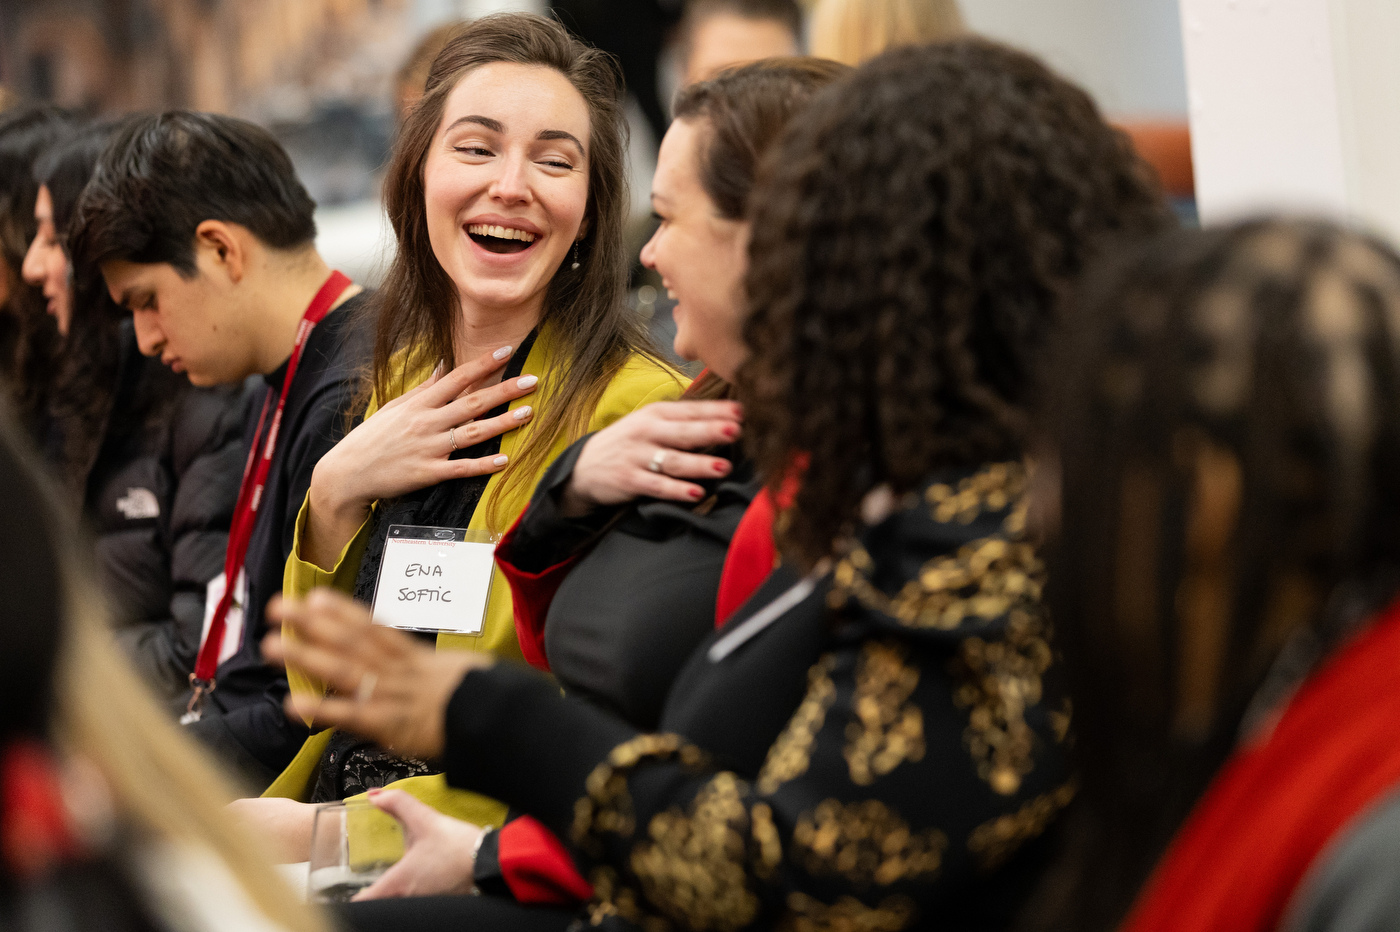 Attendees at Women Who Empower event laughing with each other.